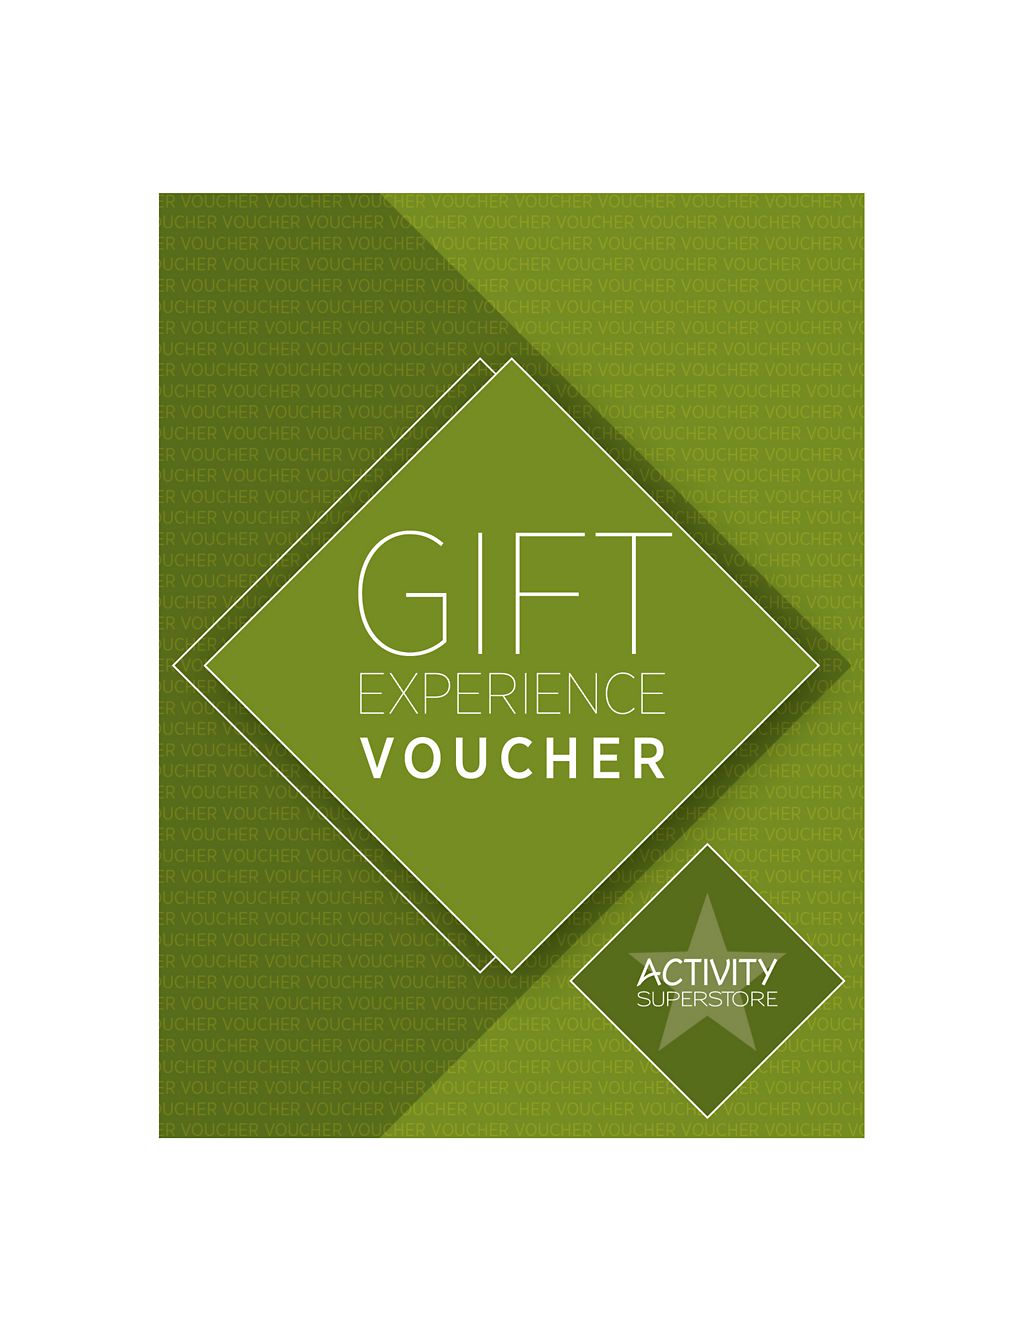 Vineyard Tour & Tastings for Two - Gift Experience Voucher 5 of 8